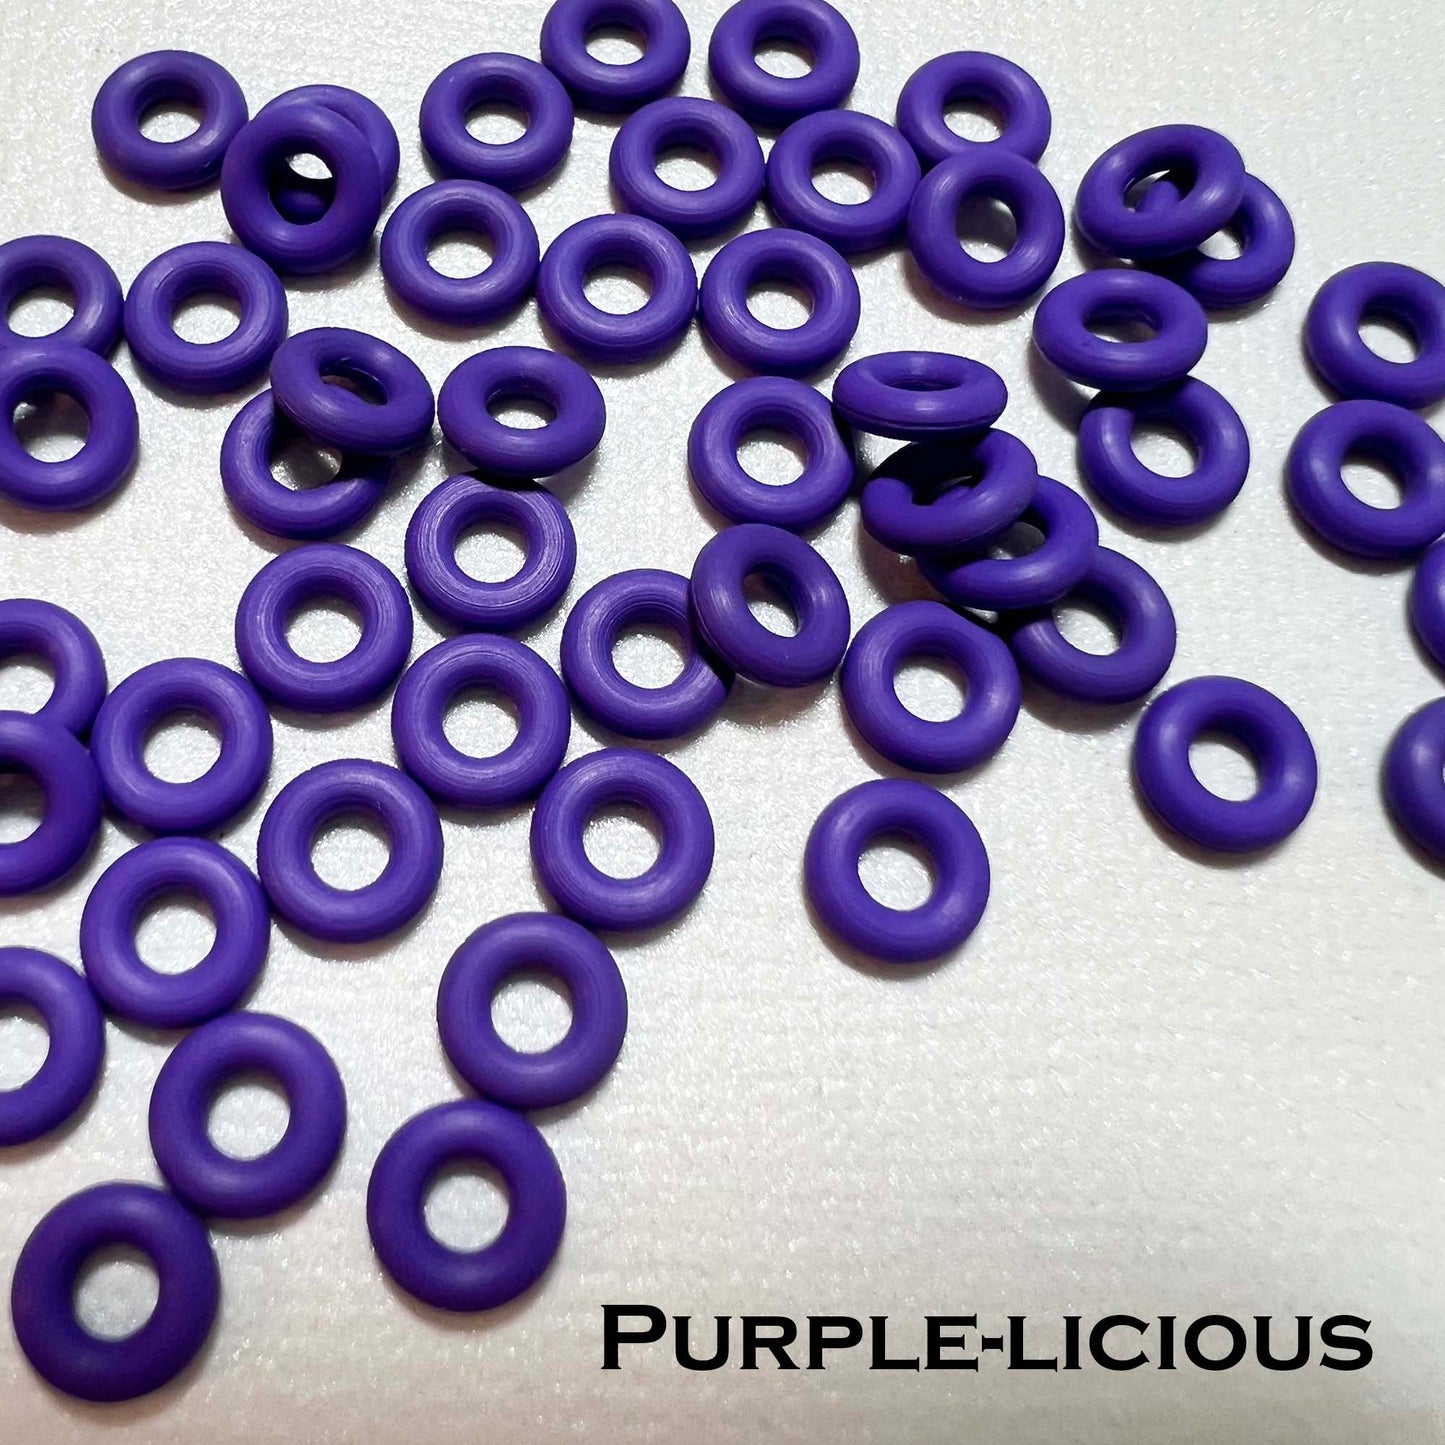 6mm Rubber O-Rings (ID: 2.6mm)  - choose color & quantity